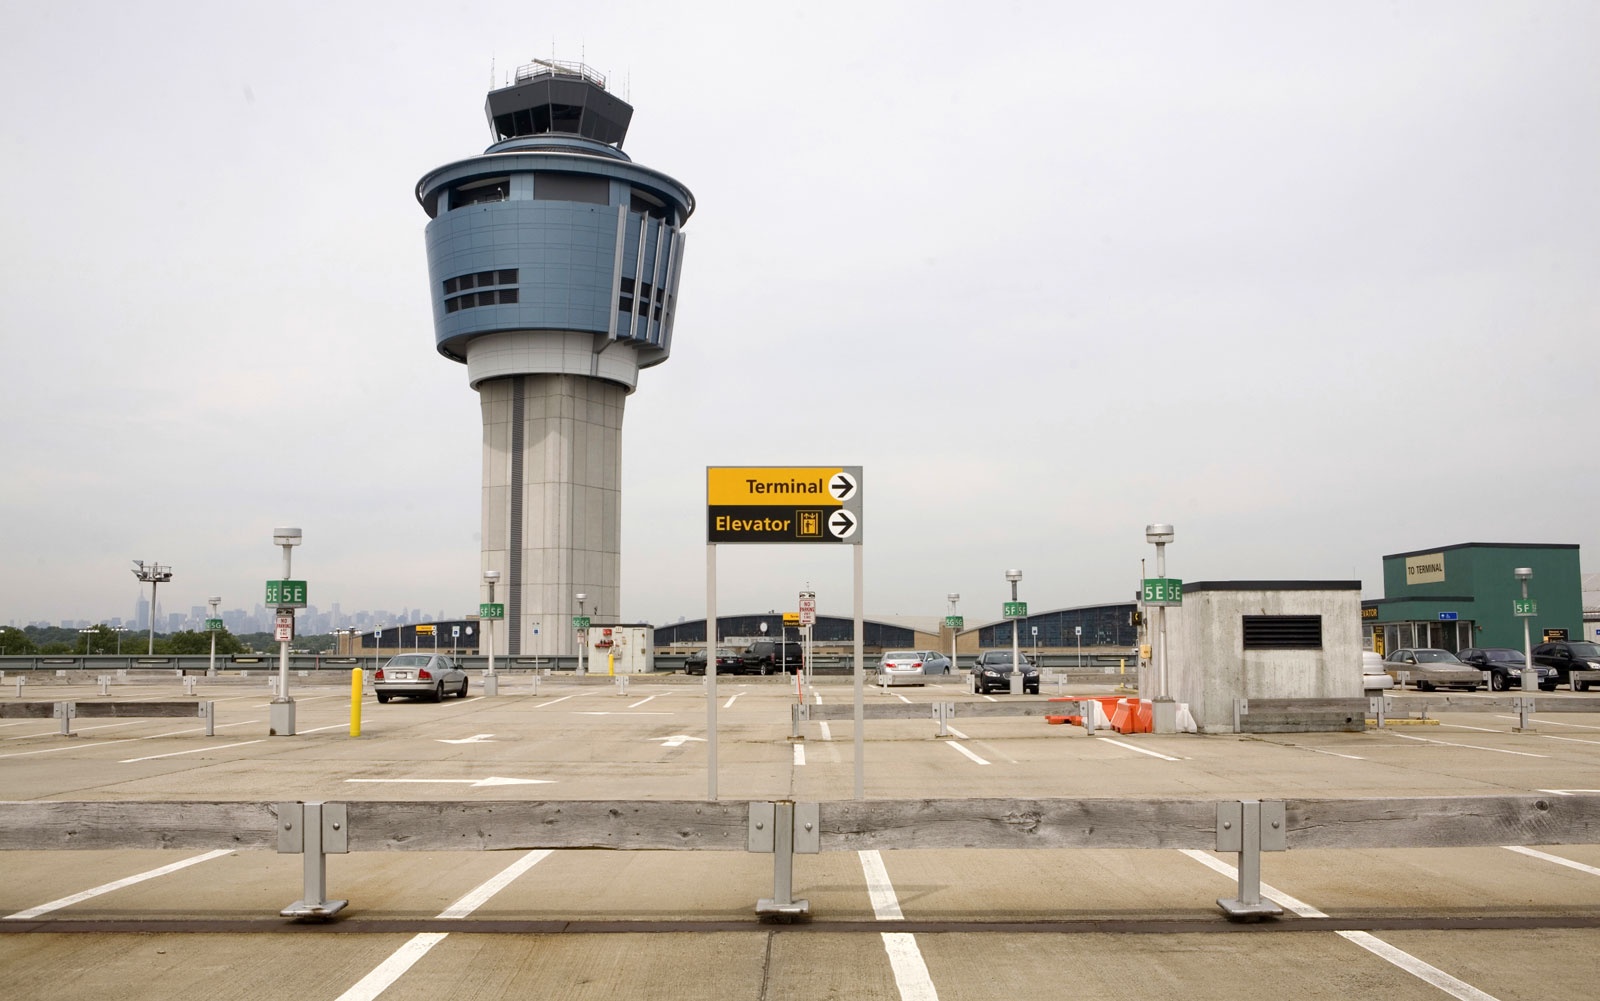 $4 Billion Later, New York’s LaGuardia Airport is Still Not Going to be Good Enough 